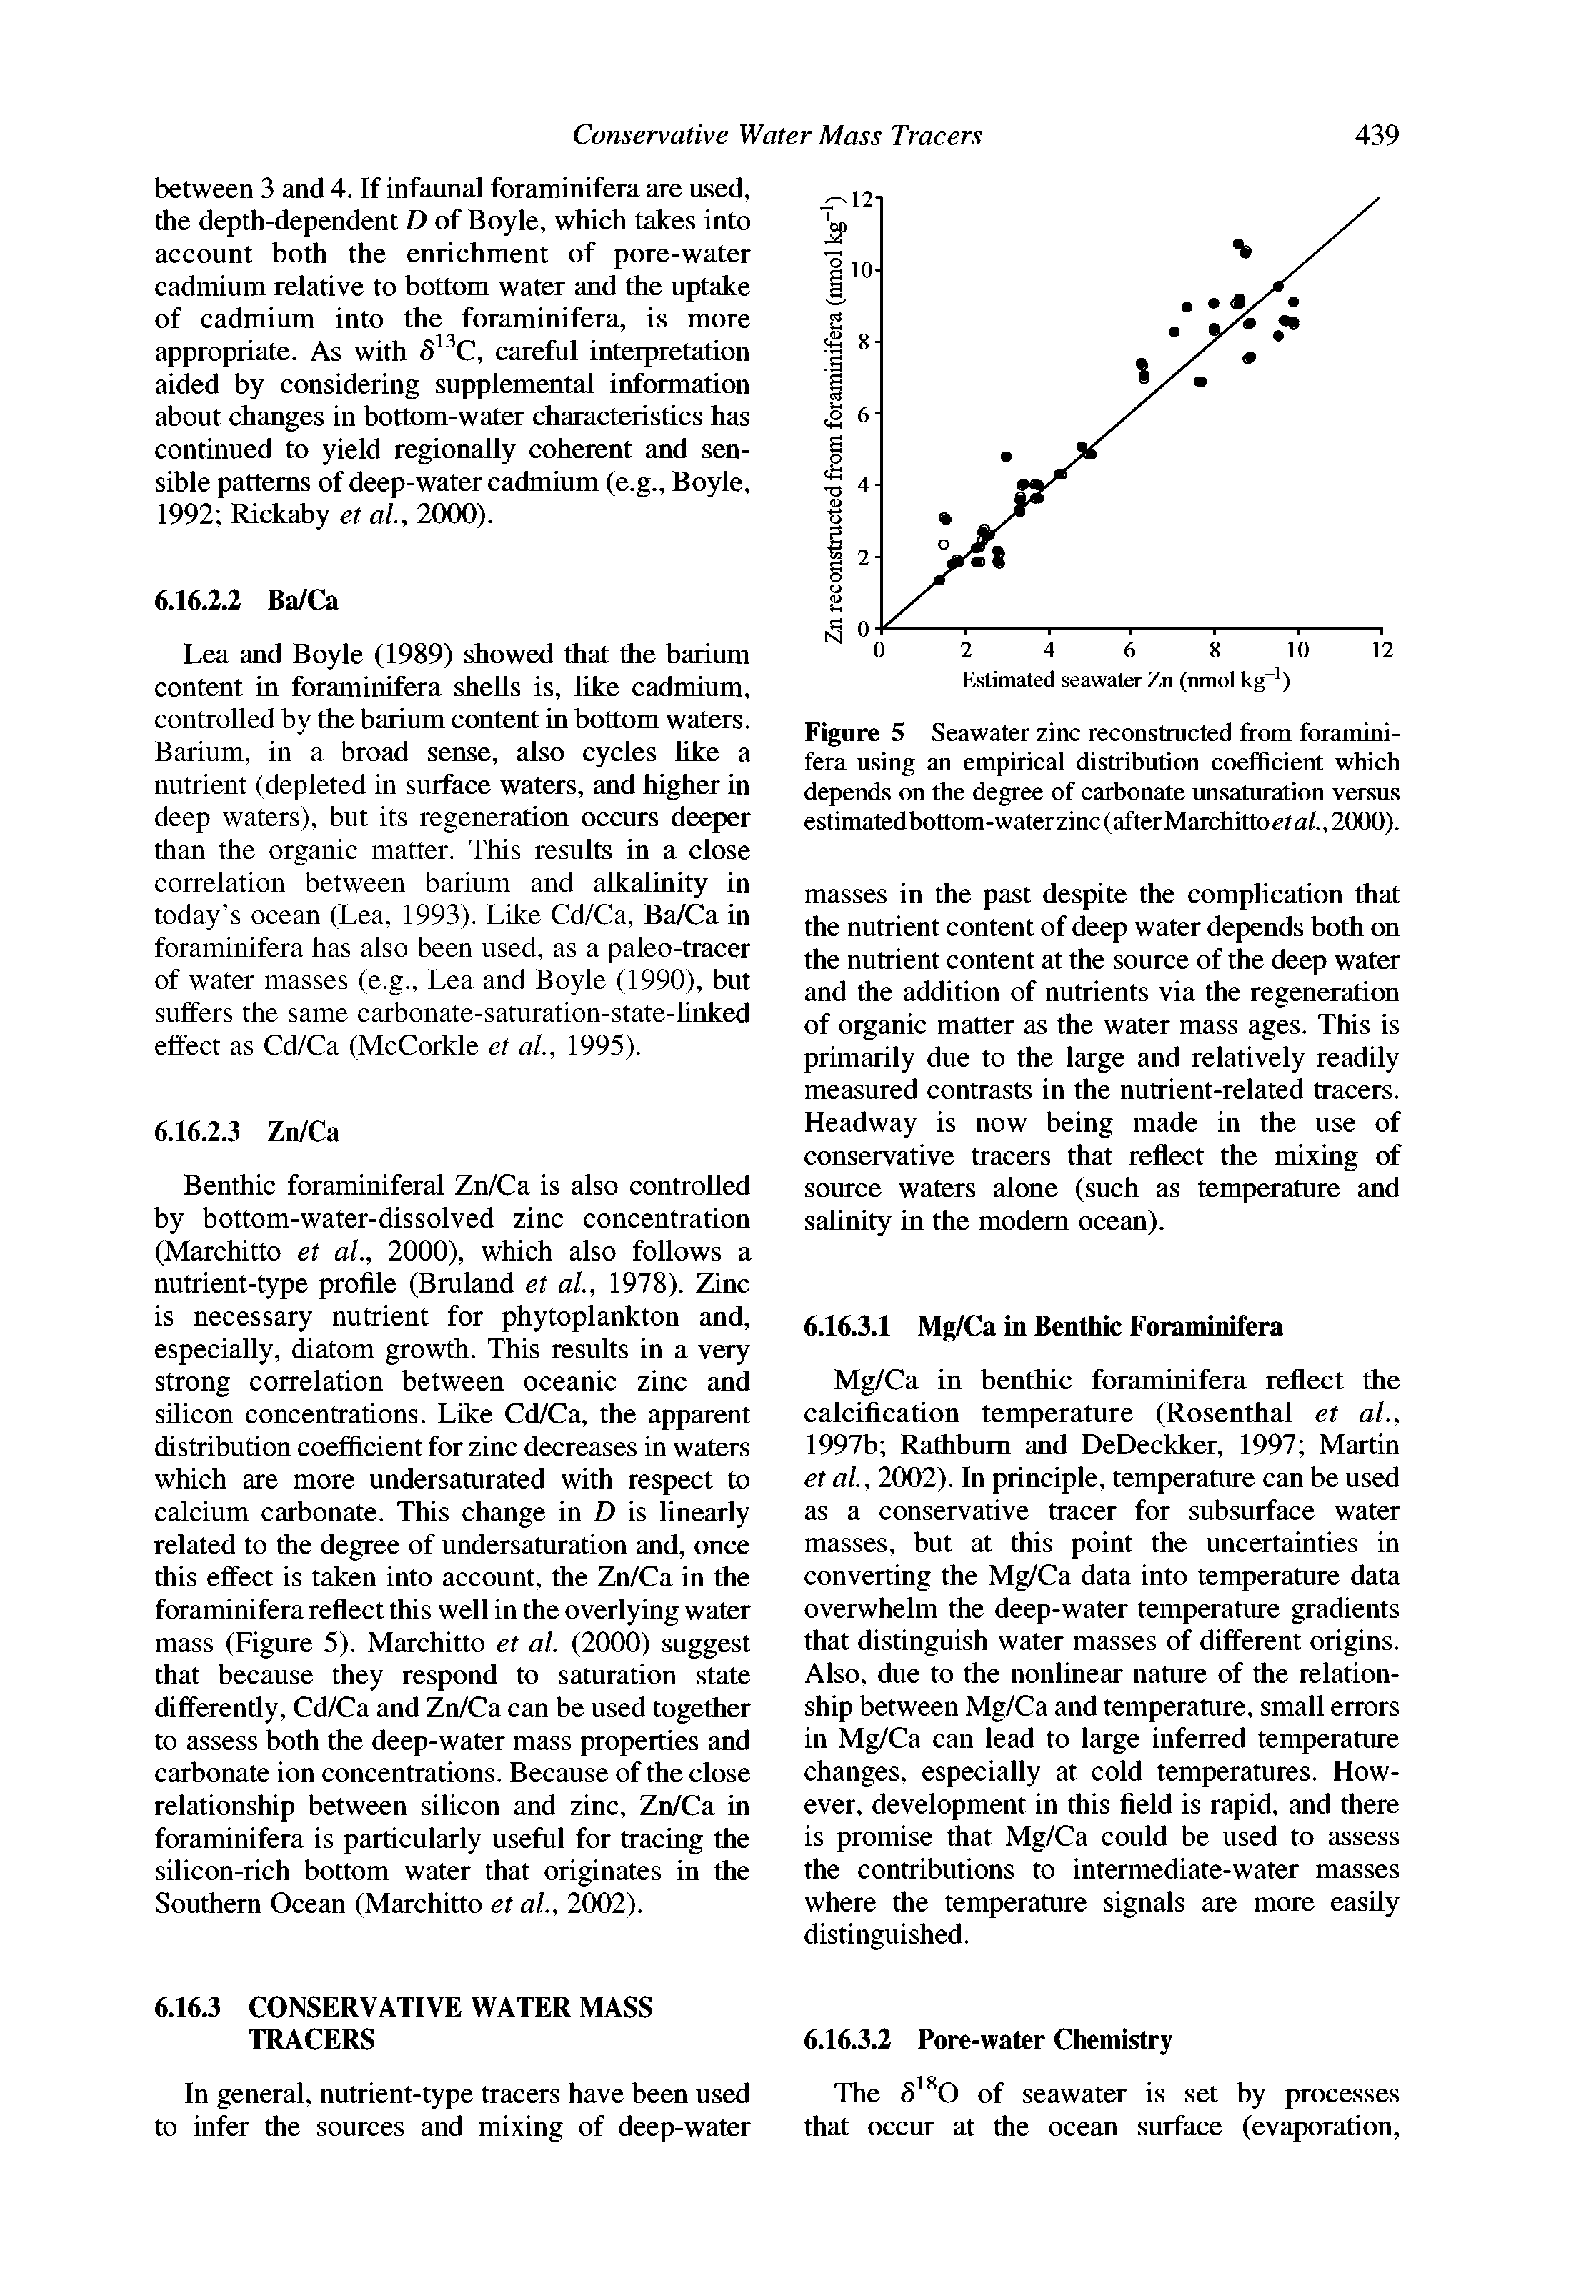 Figure 5 Seawater zinc reconstmcted from foramini-fera using an empirical distribution coefficient which depends on the degree of carbonate unsaturation versus estimatedbottom-waterzinc(afterMarchittoera/.,2000).